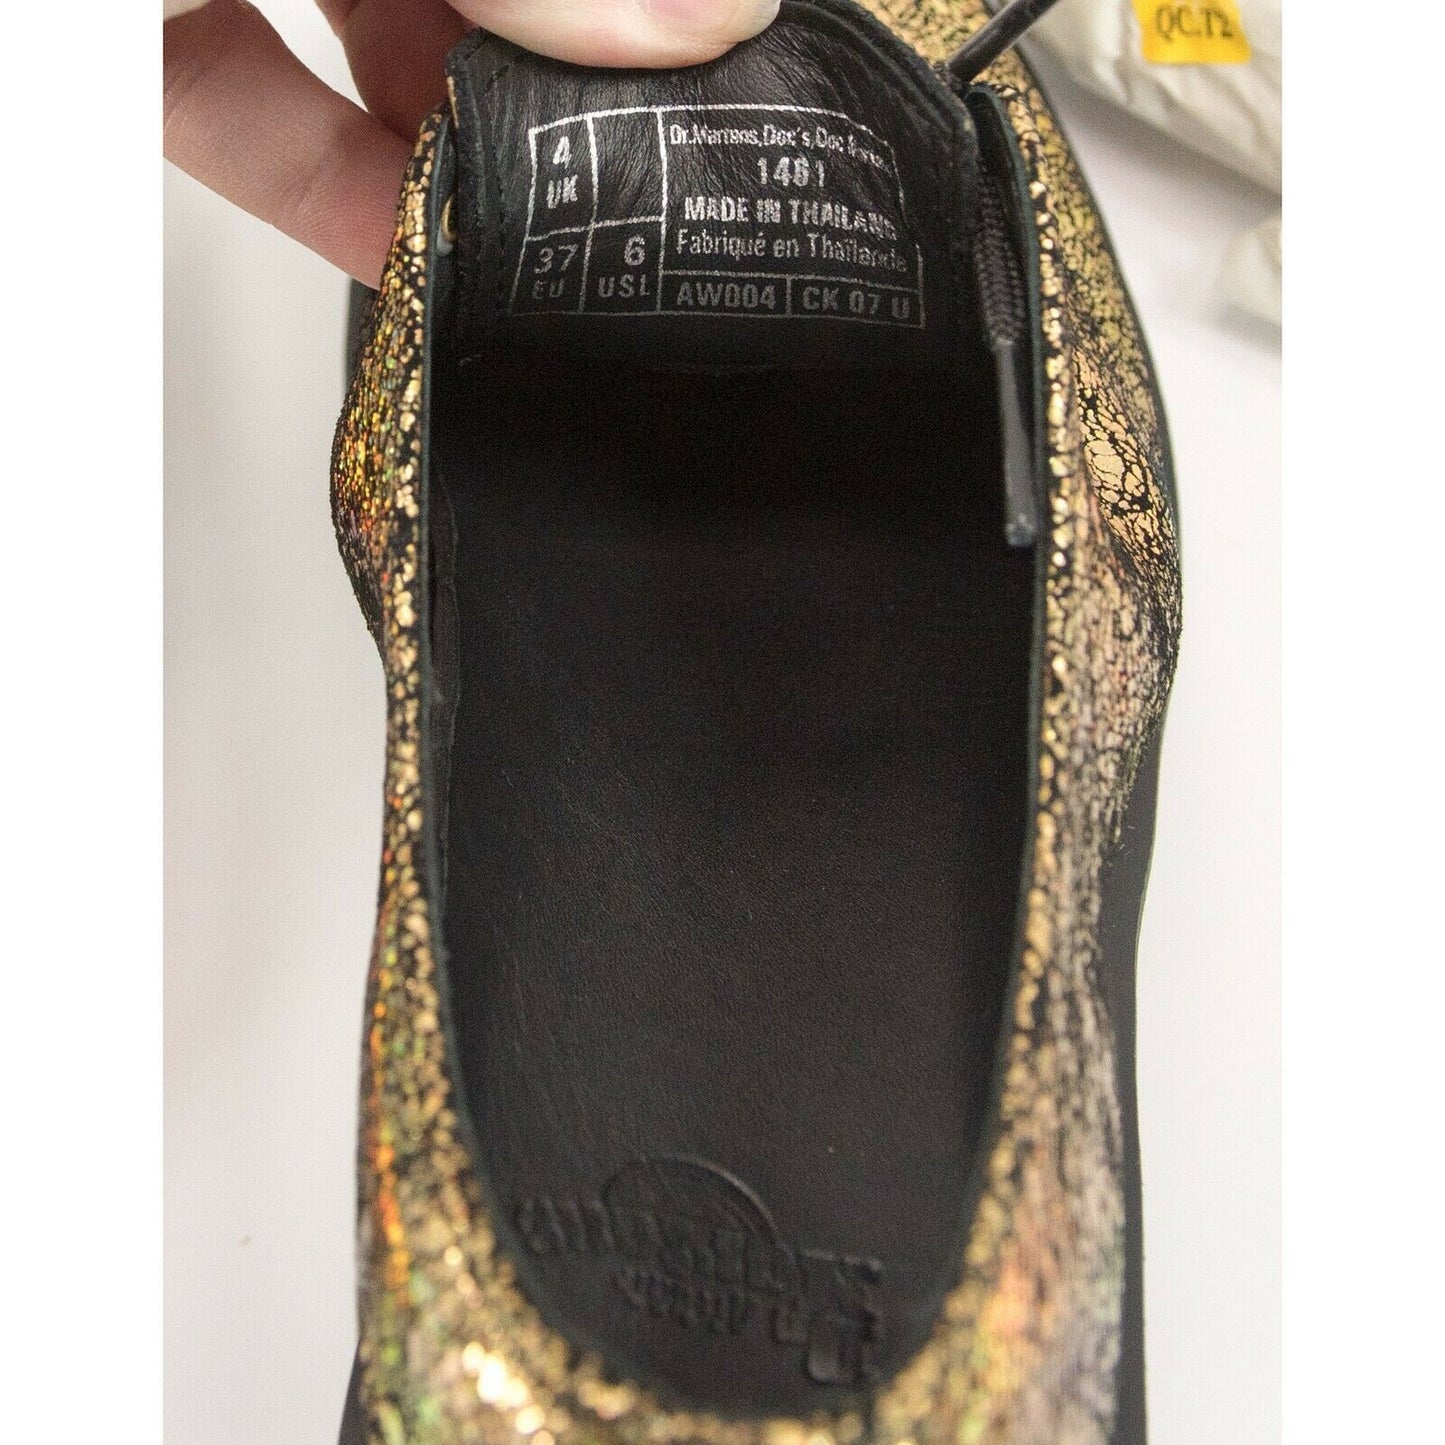 Dr. Martens Gold Iridescent Crackle Leather Oxford Lace Up Shoes Size 6 NIB